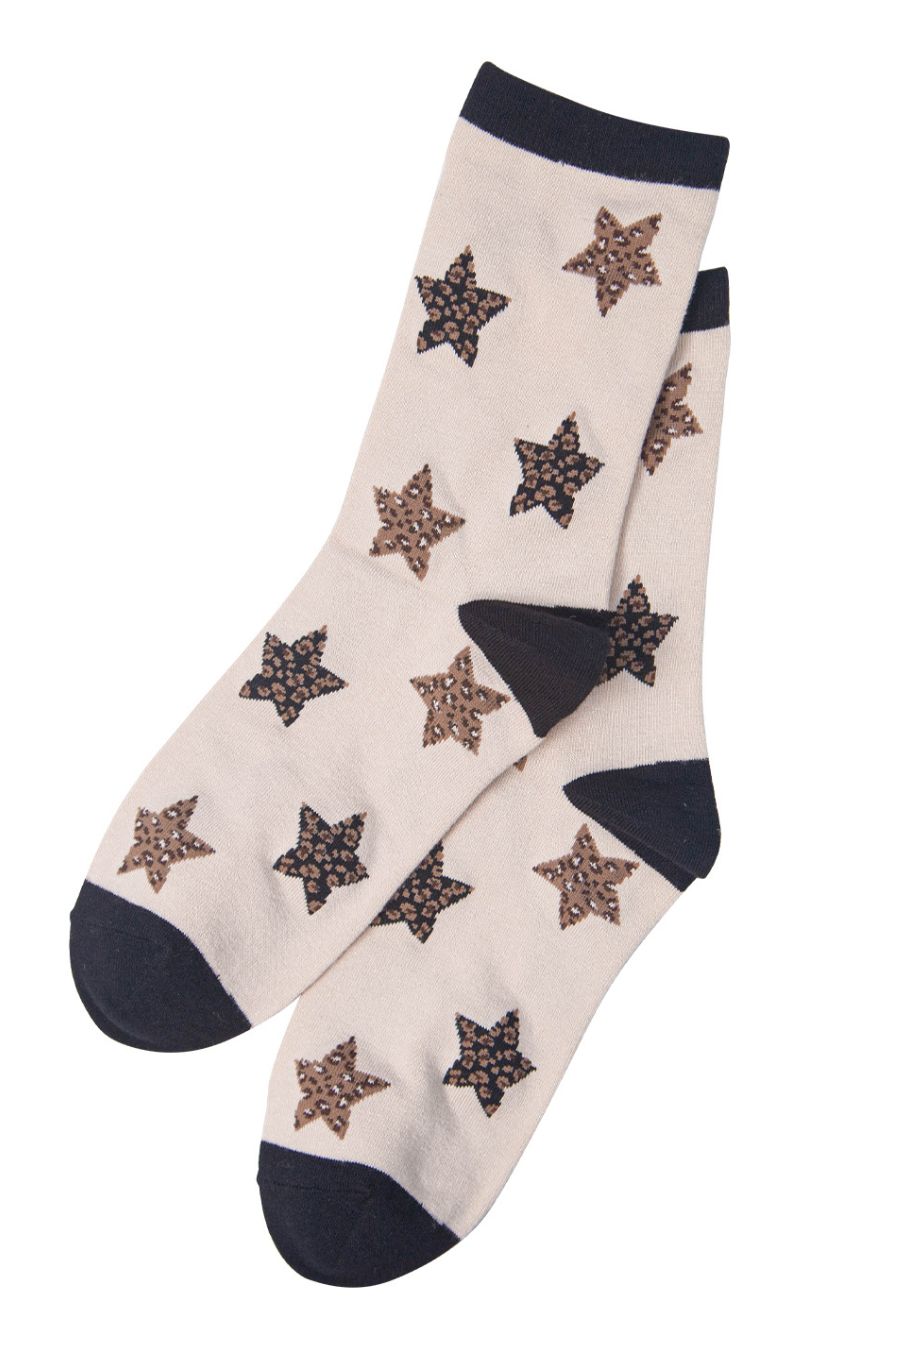 womens ankle socks with leopard print stars in cream and brown